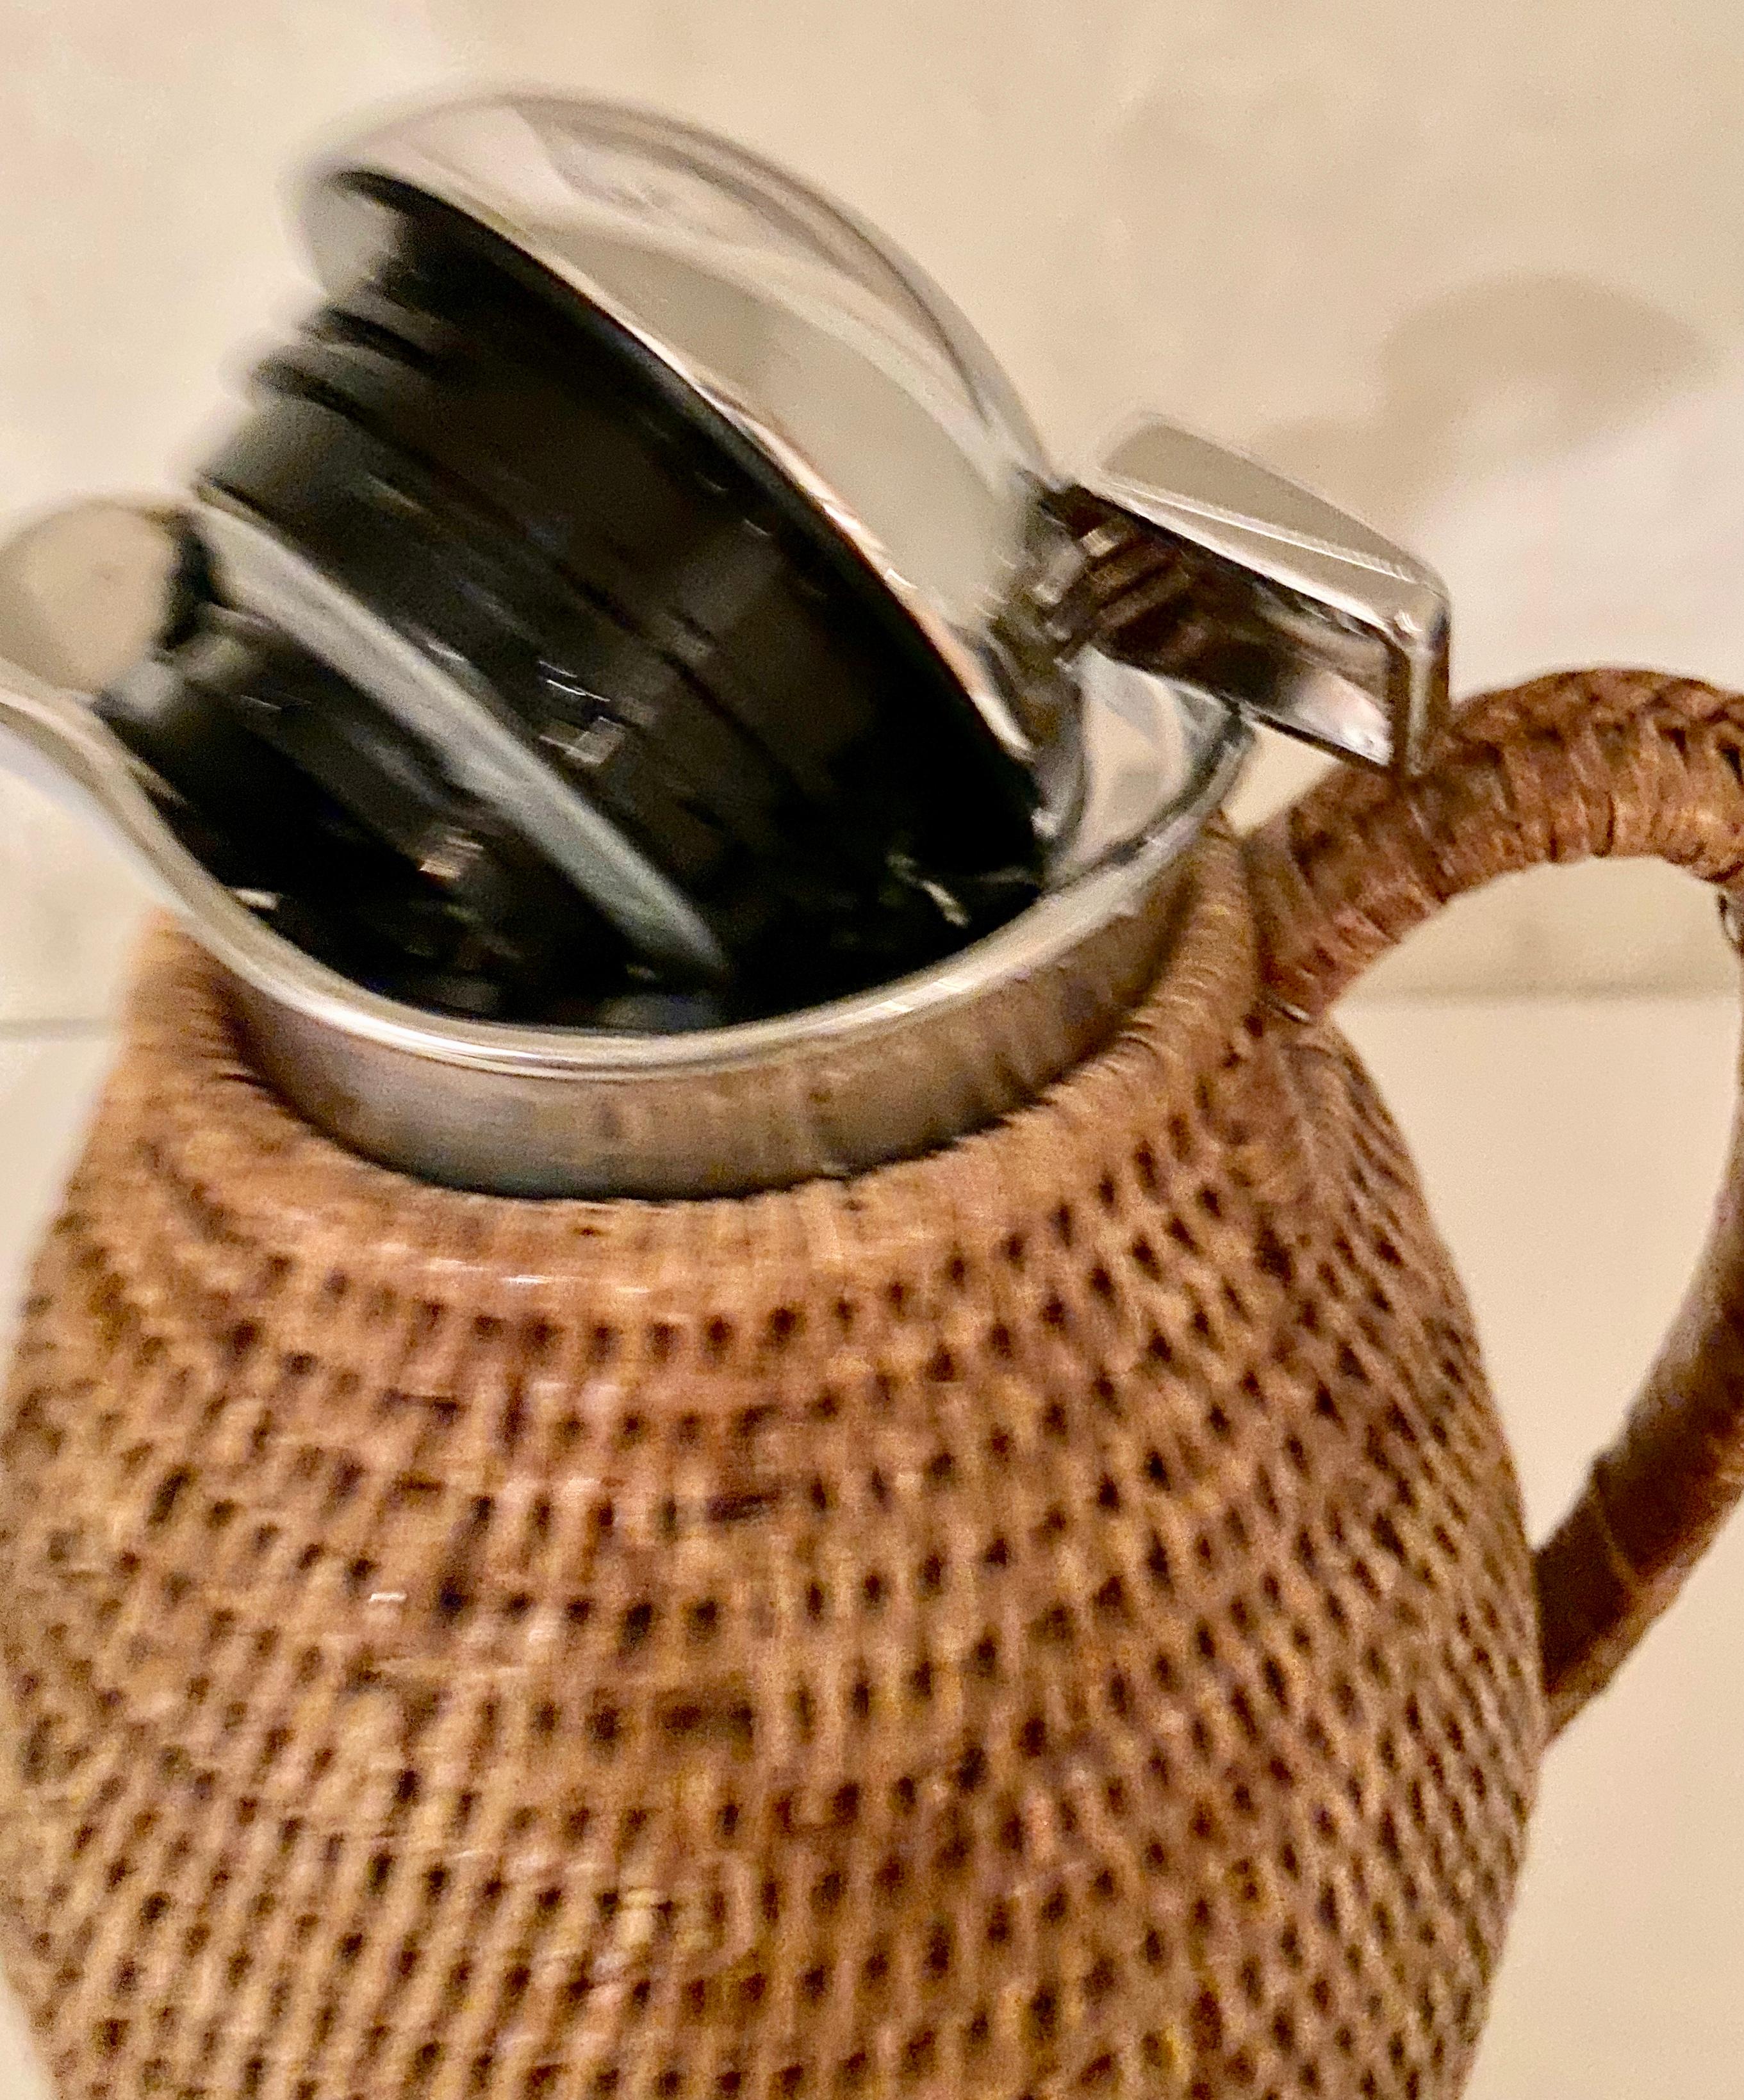 thermal coffee decanter